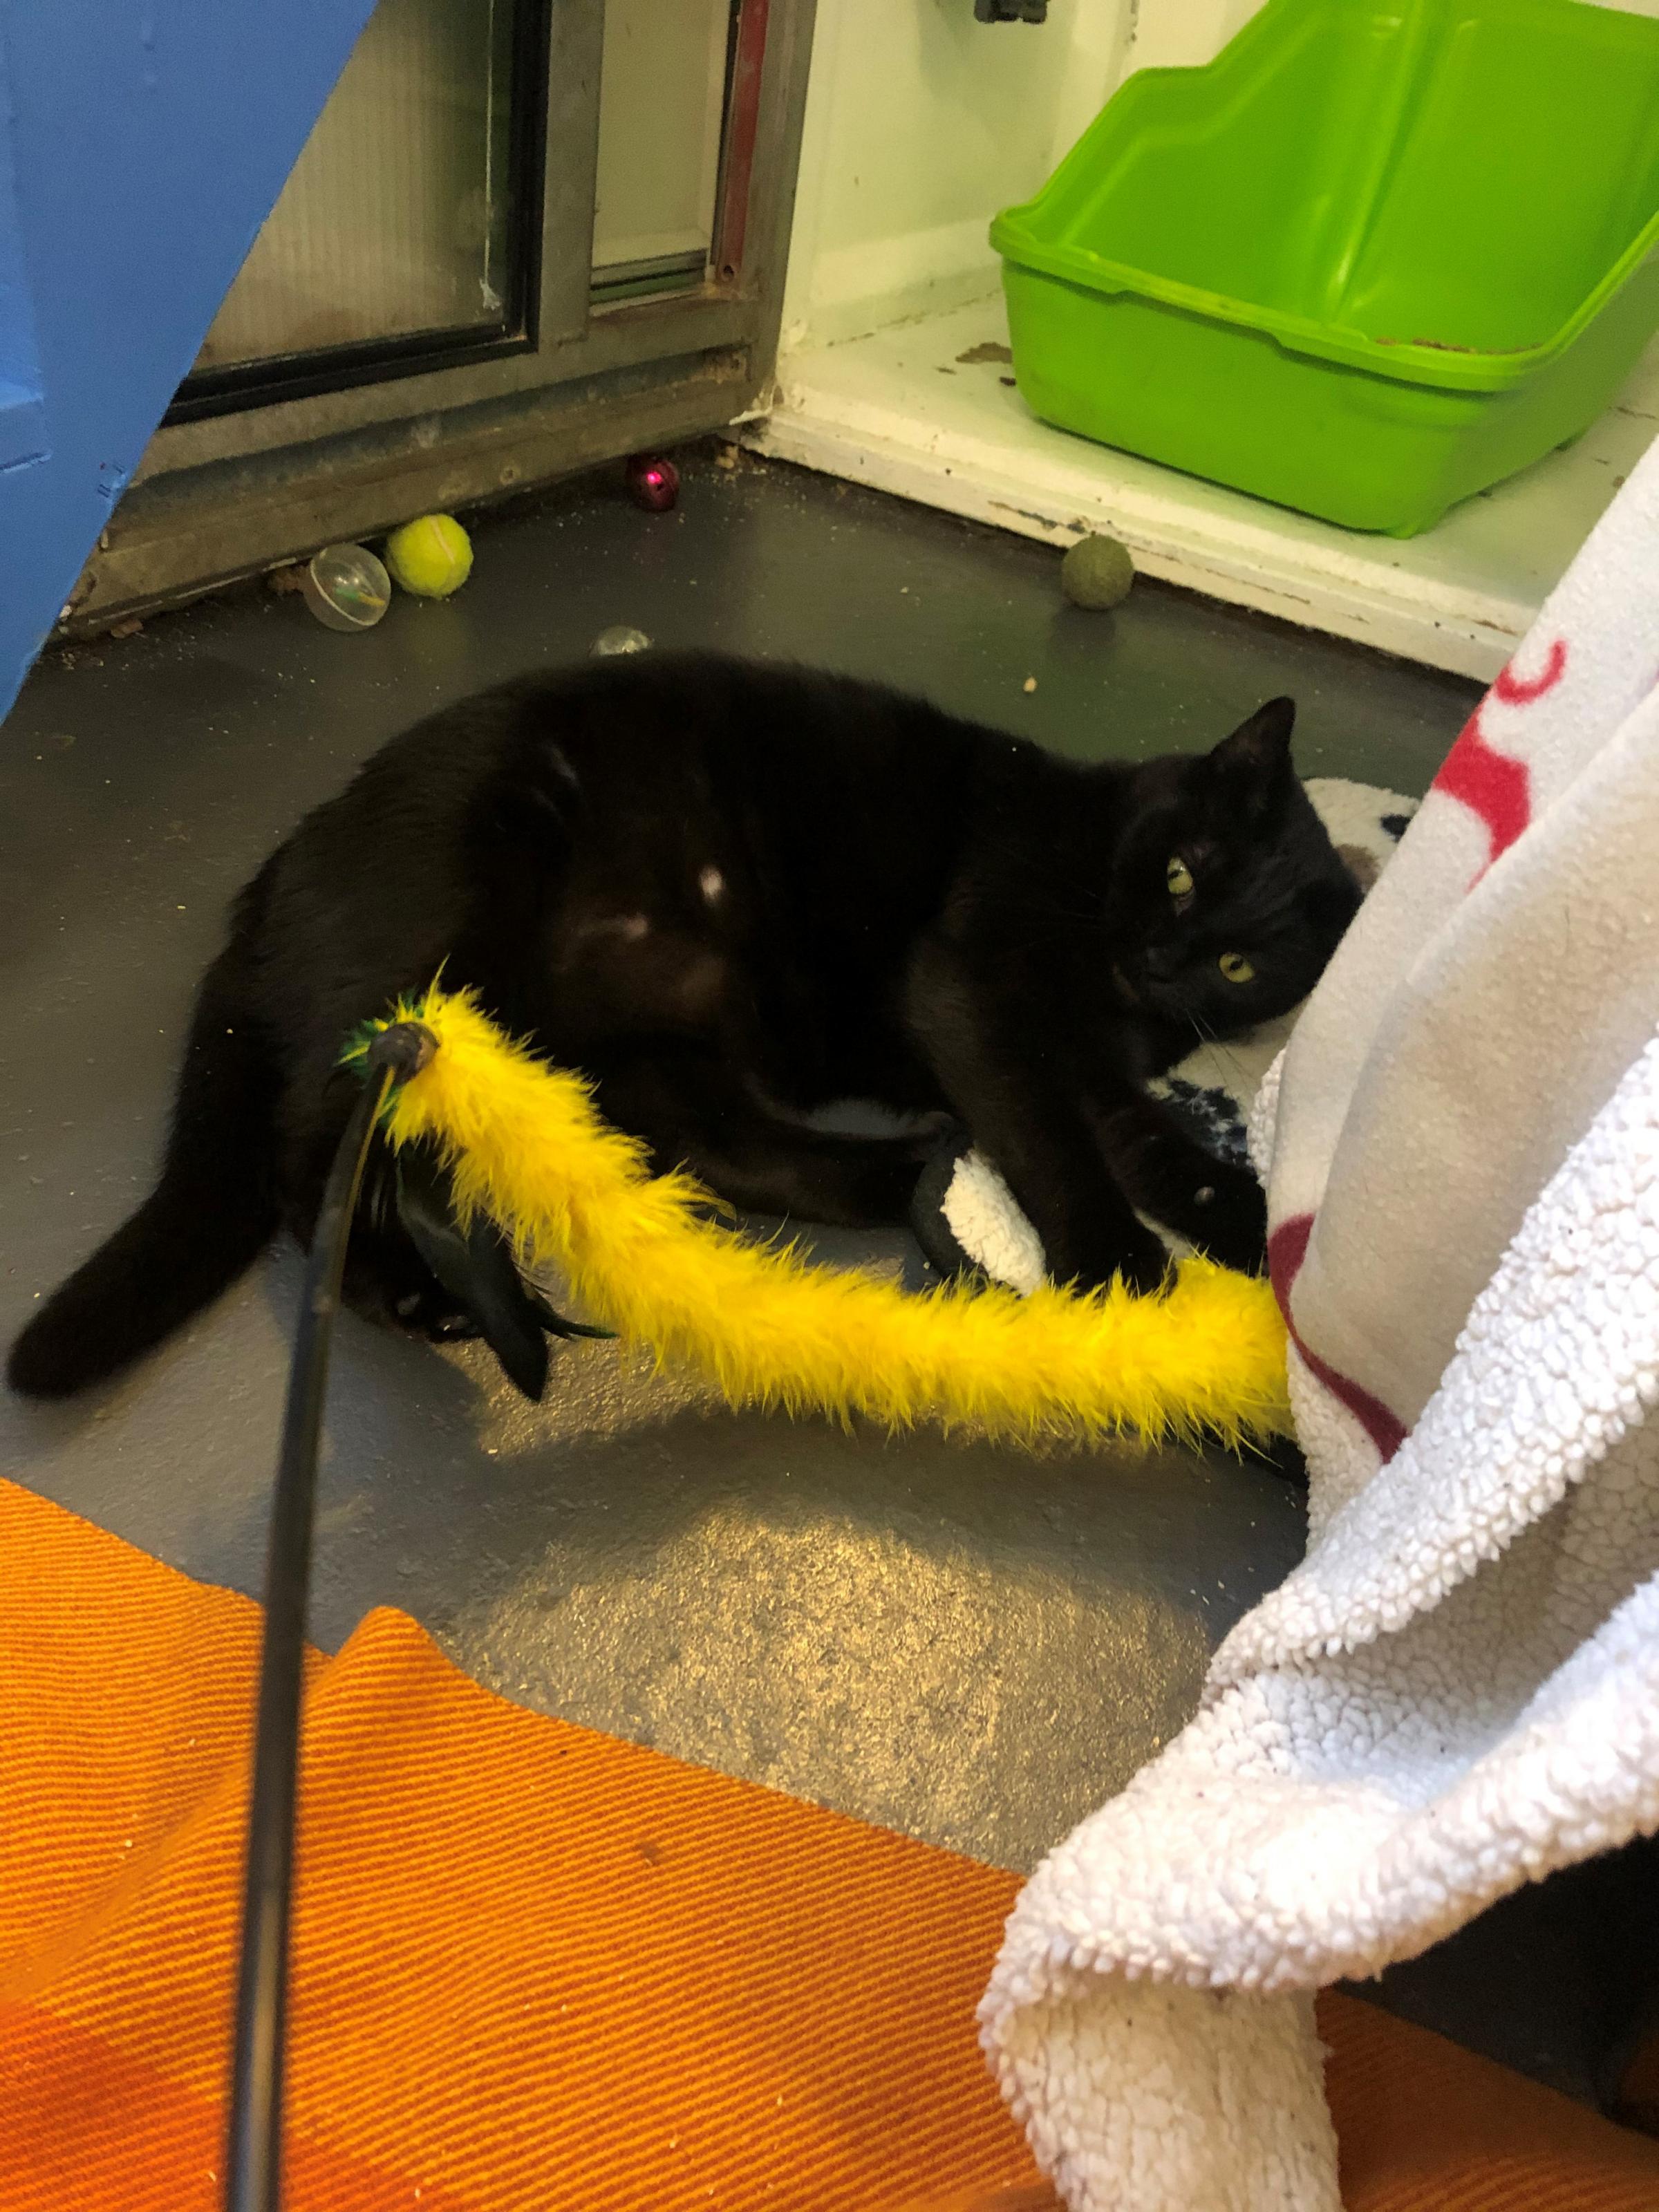 The two-year-old cat arrived at the trust as a pregnant stray